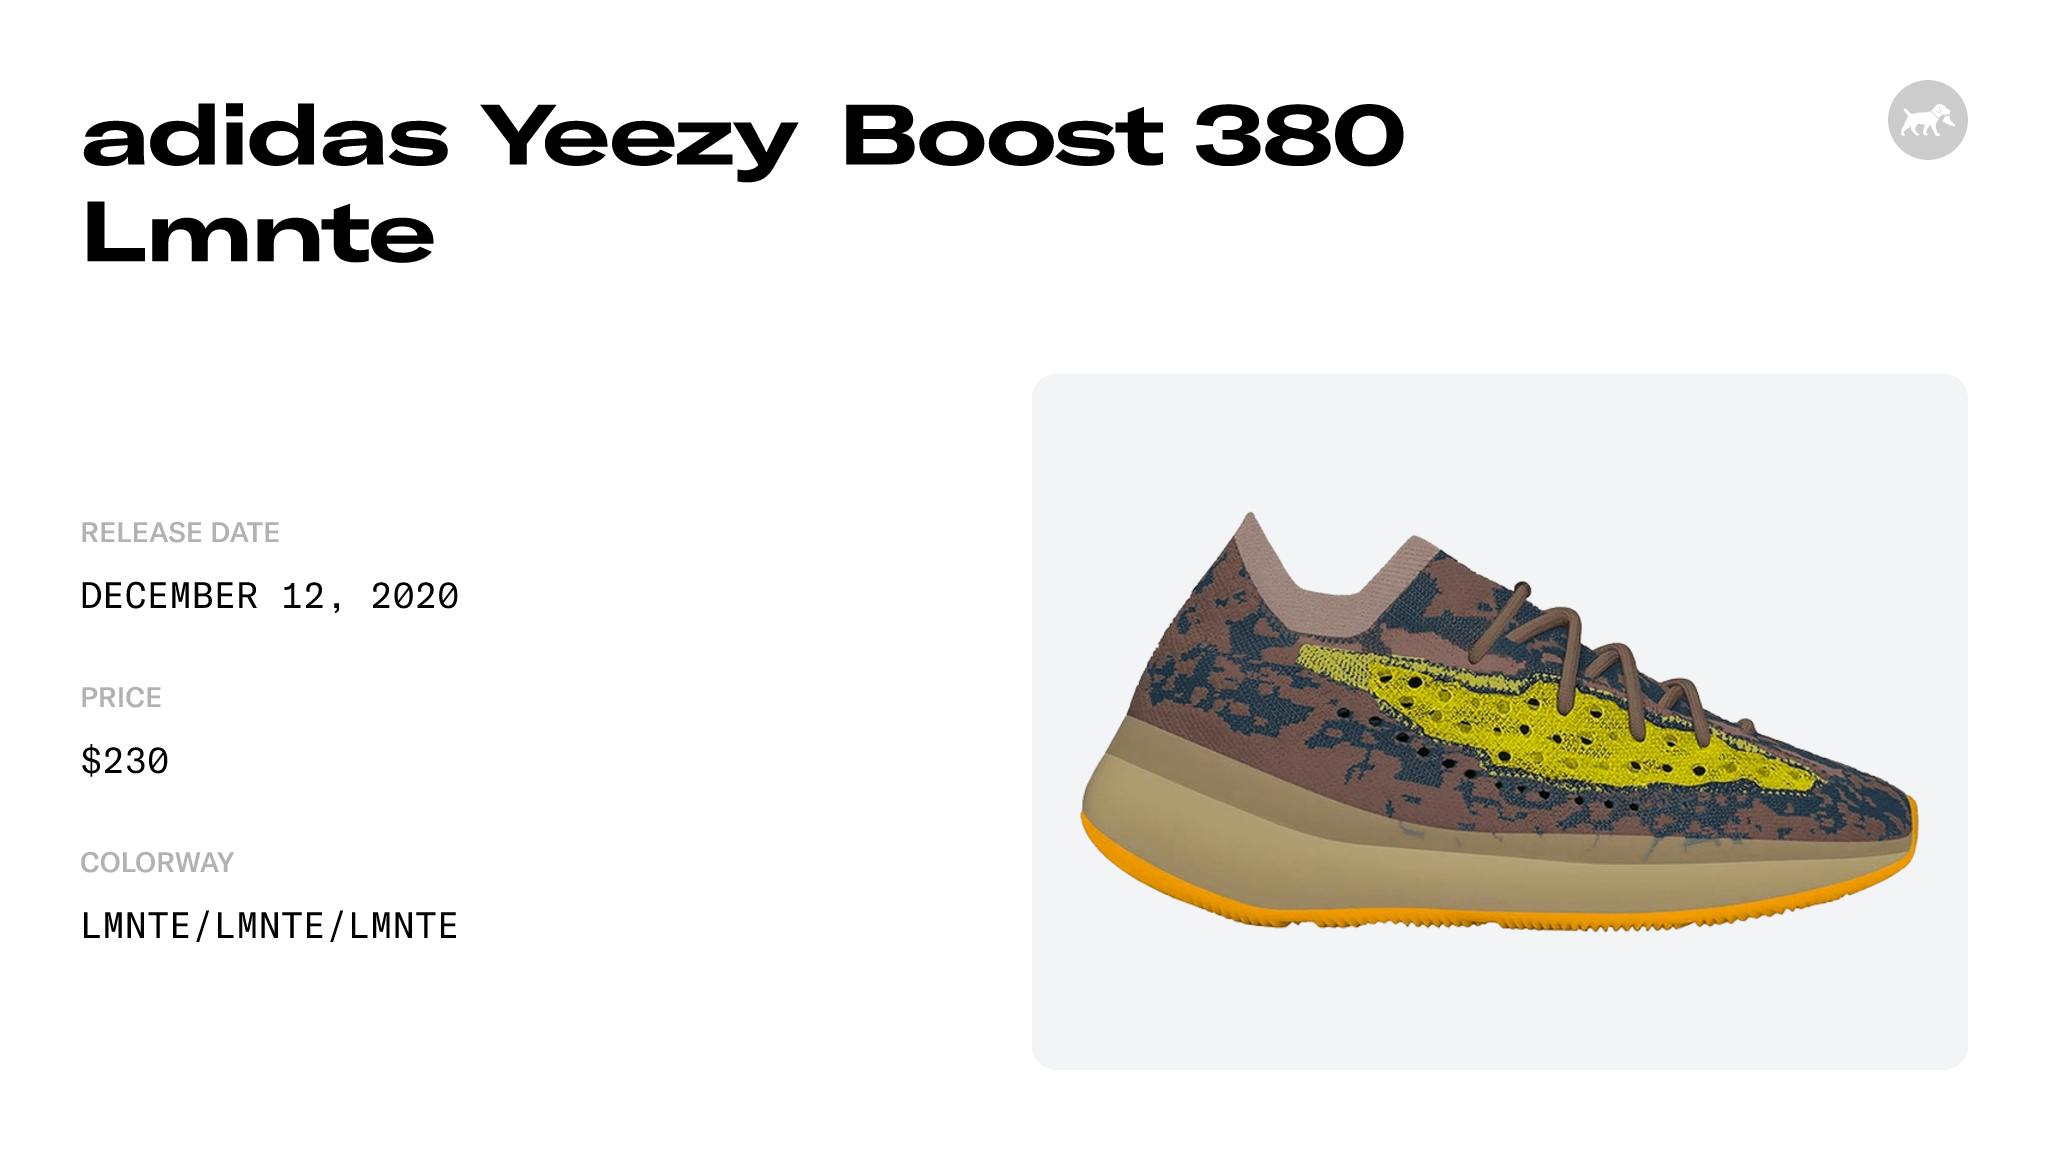 adidas Yeezy Boost 380 Lmnte - FZ4982 Raffles and Release Date